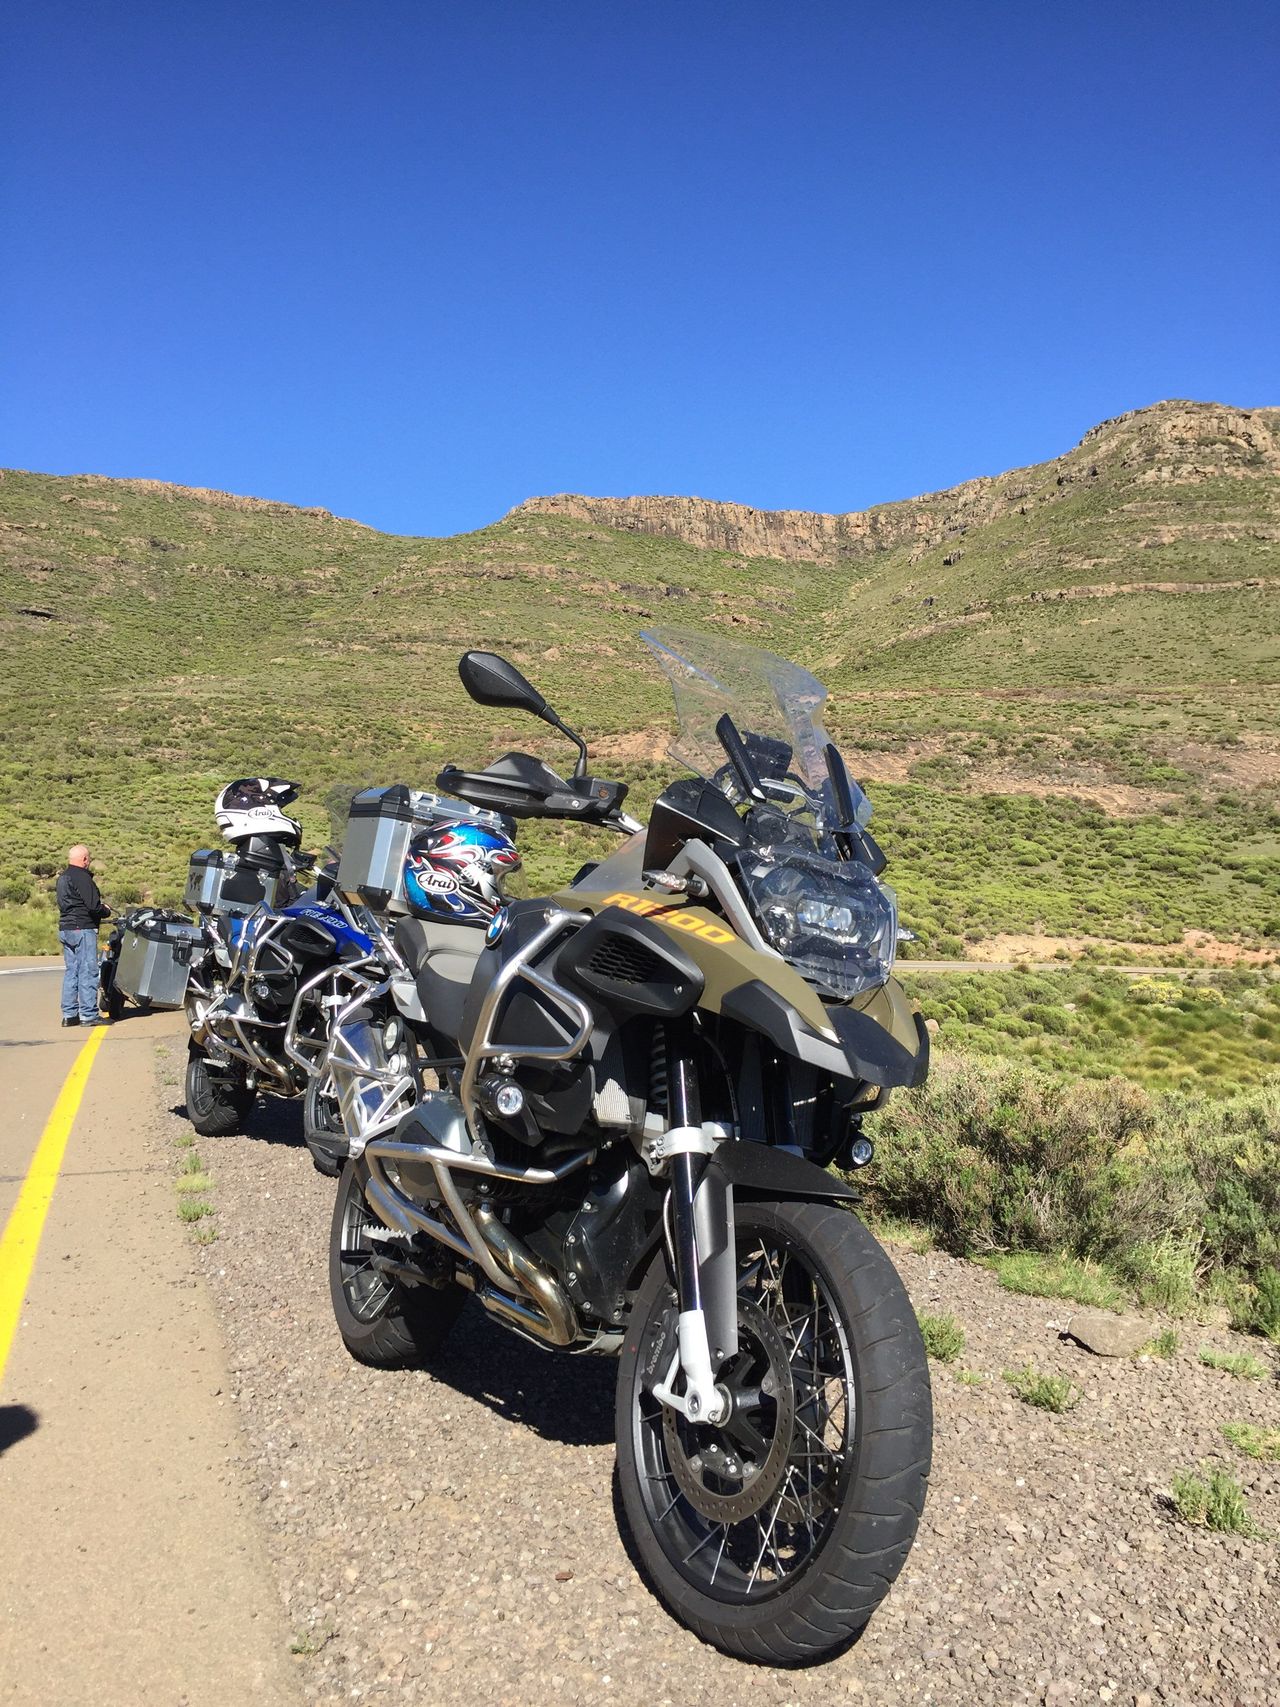 With a GS every ride is an adventure!